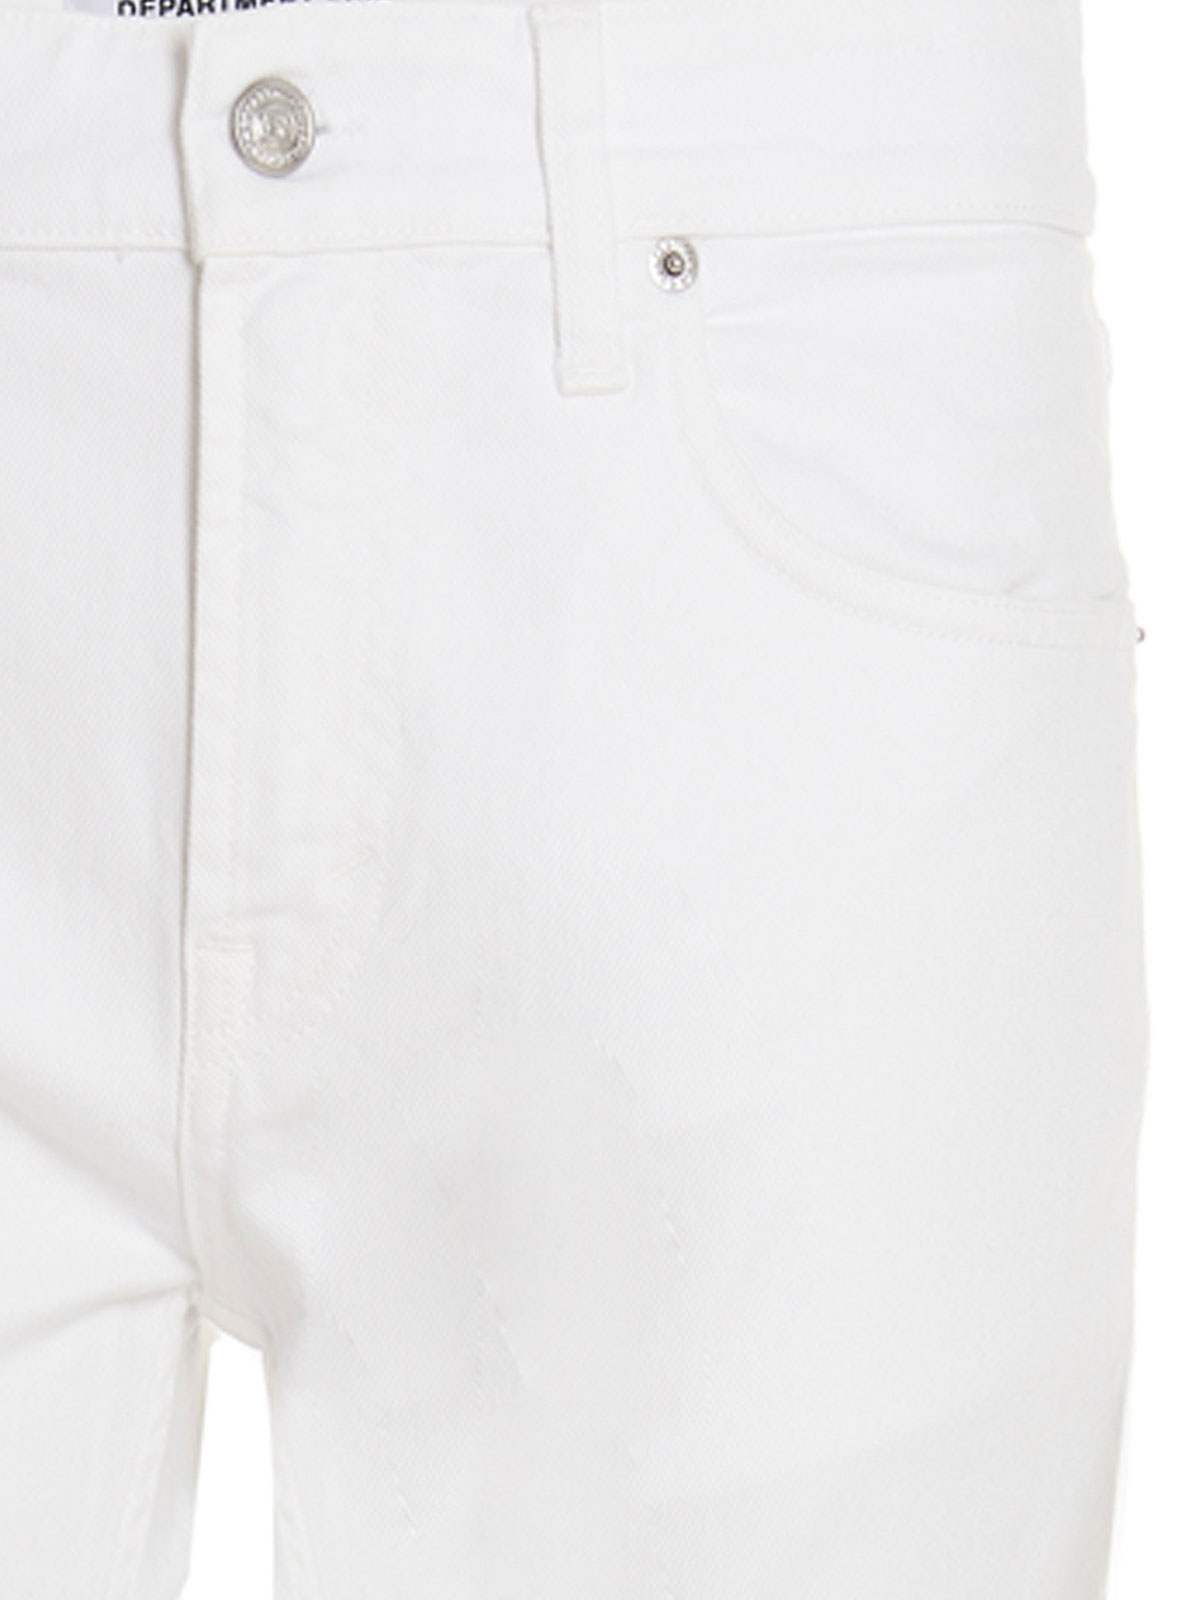 Shop Department 5 Skeith Jeans In Blanco